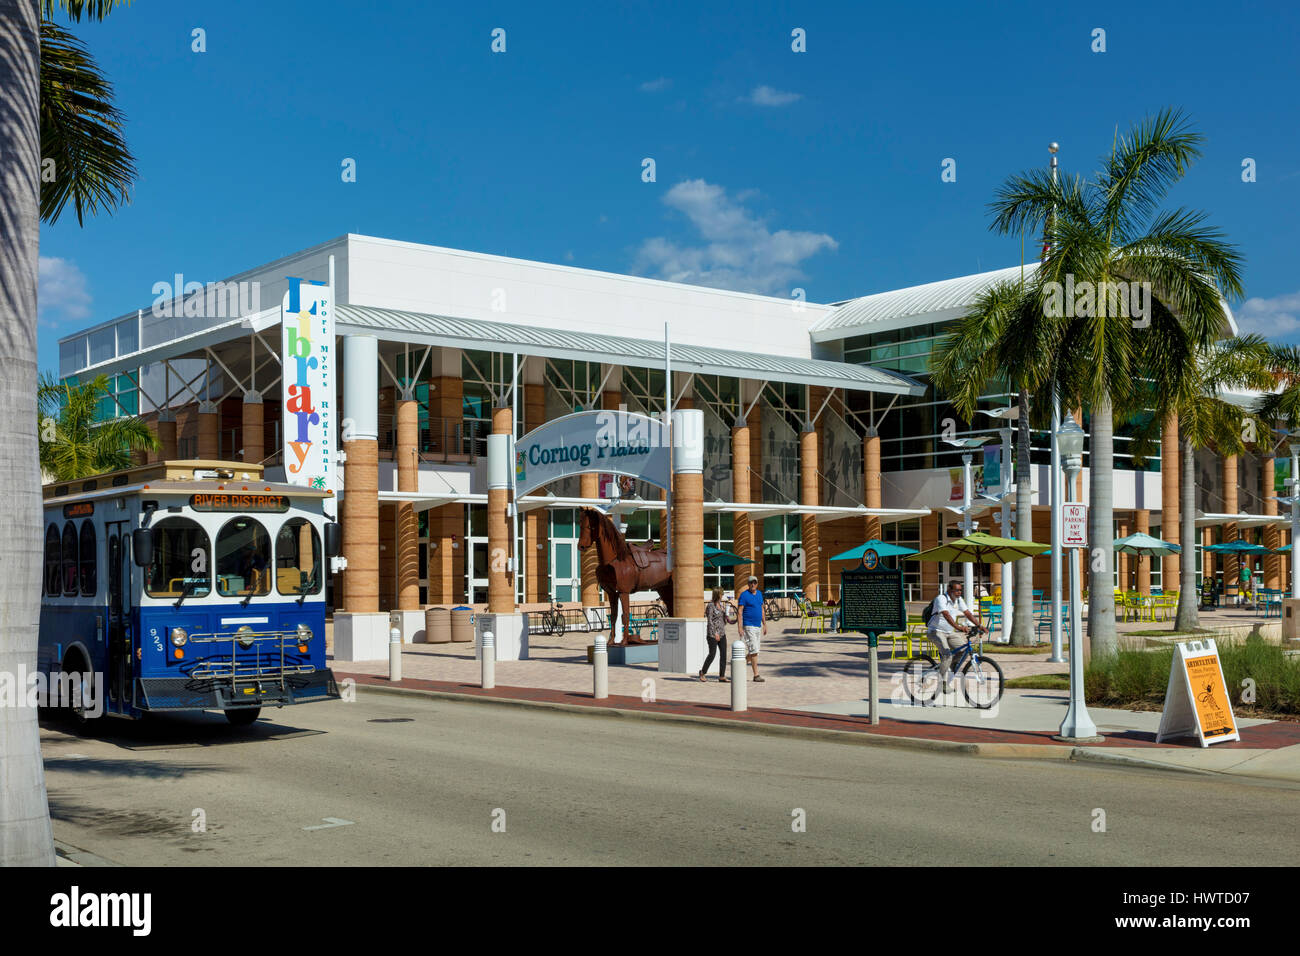 Fort Myers Regional Library at Cornog Plaza in downtown Ft. Myers, Florida, USA Stock Photo